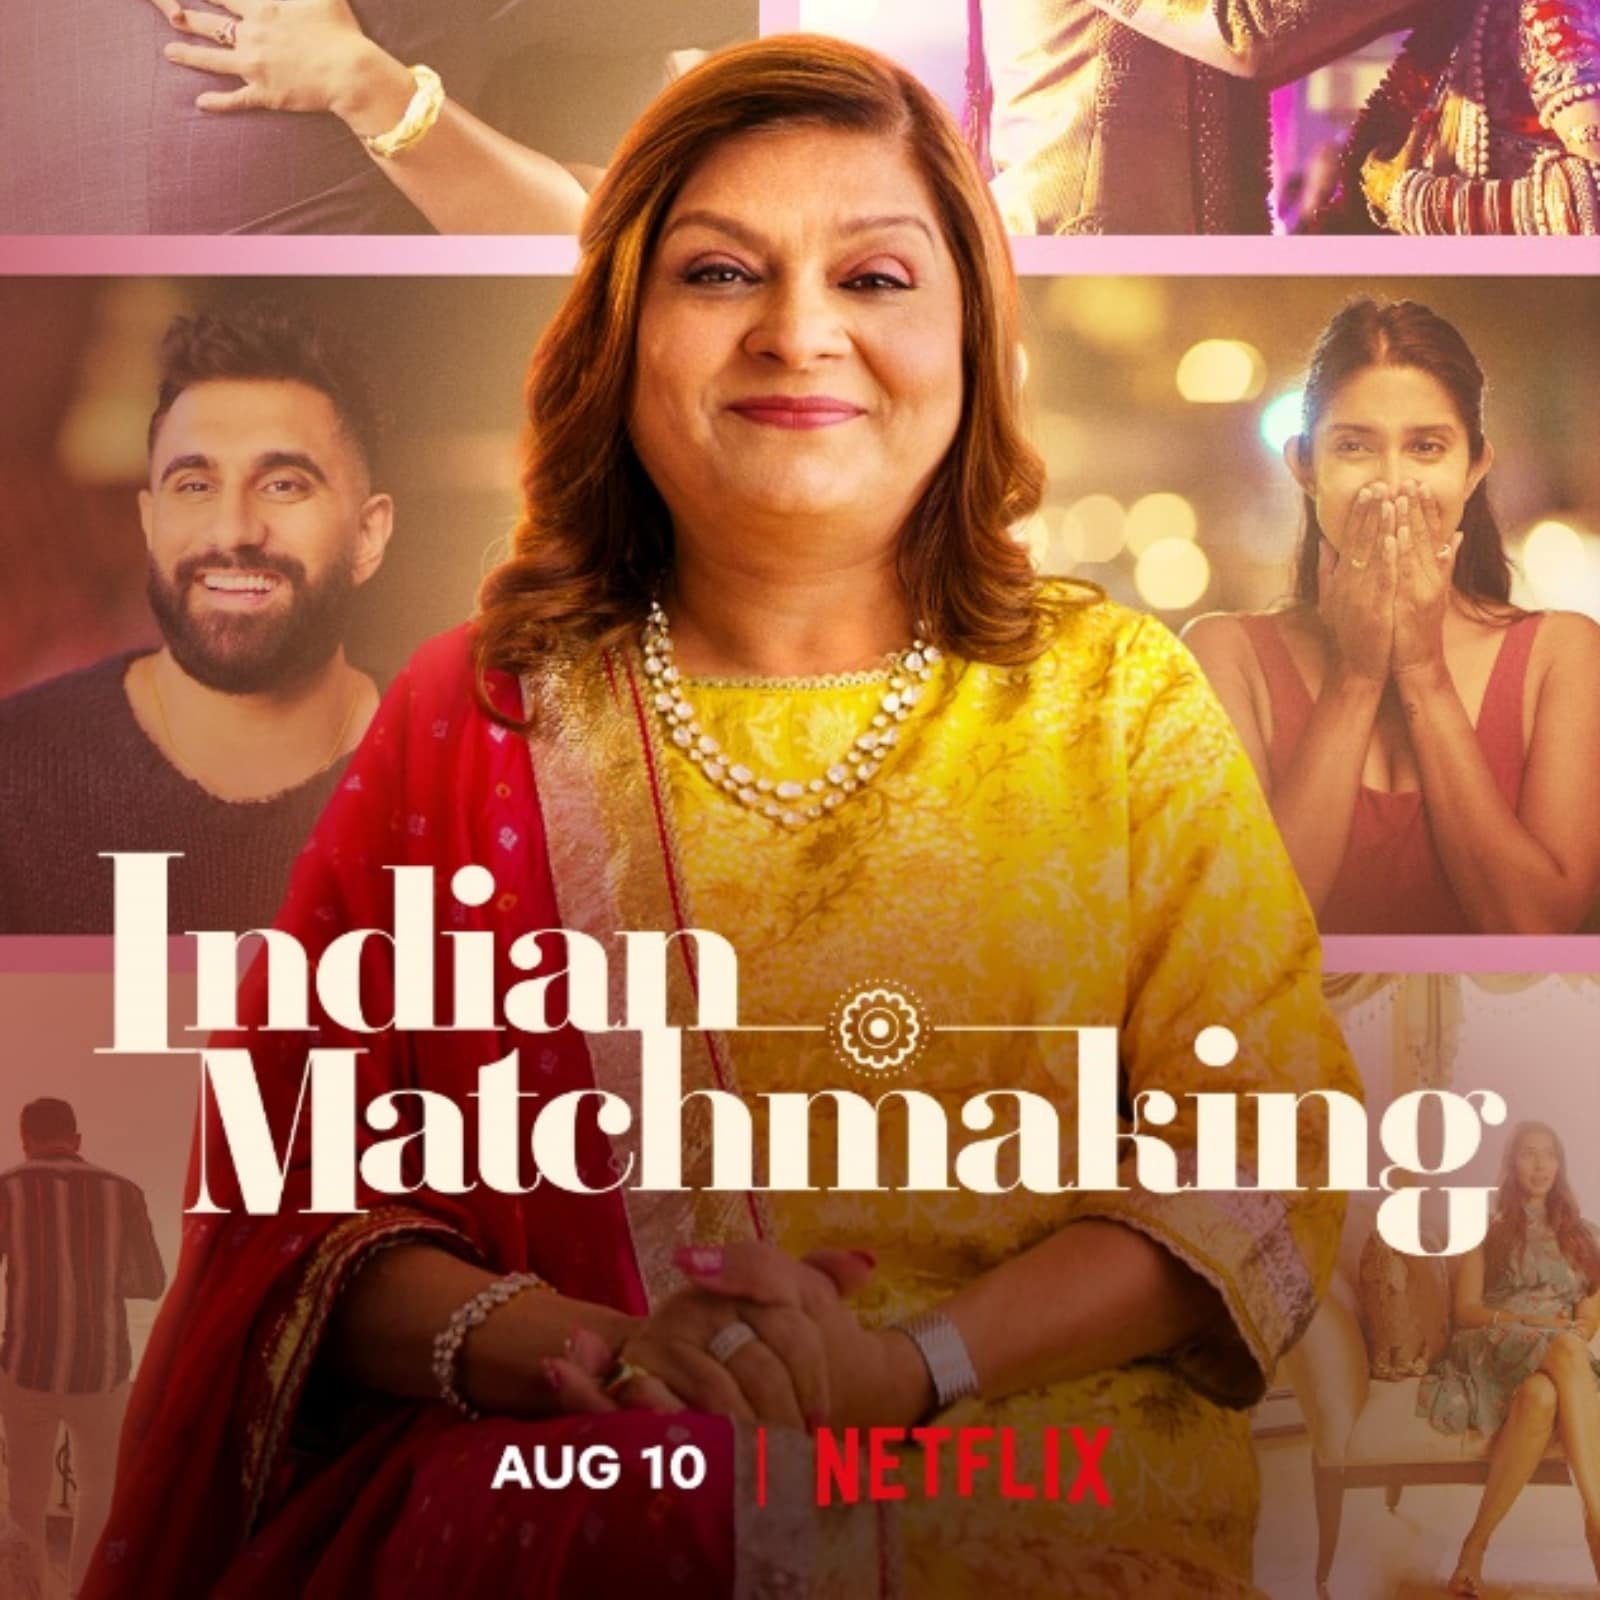 Indian Matchmaking 2 Trailer: Sima Aunty Manages More Expectations as She Helps Singles Find Partners